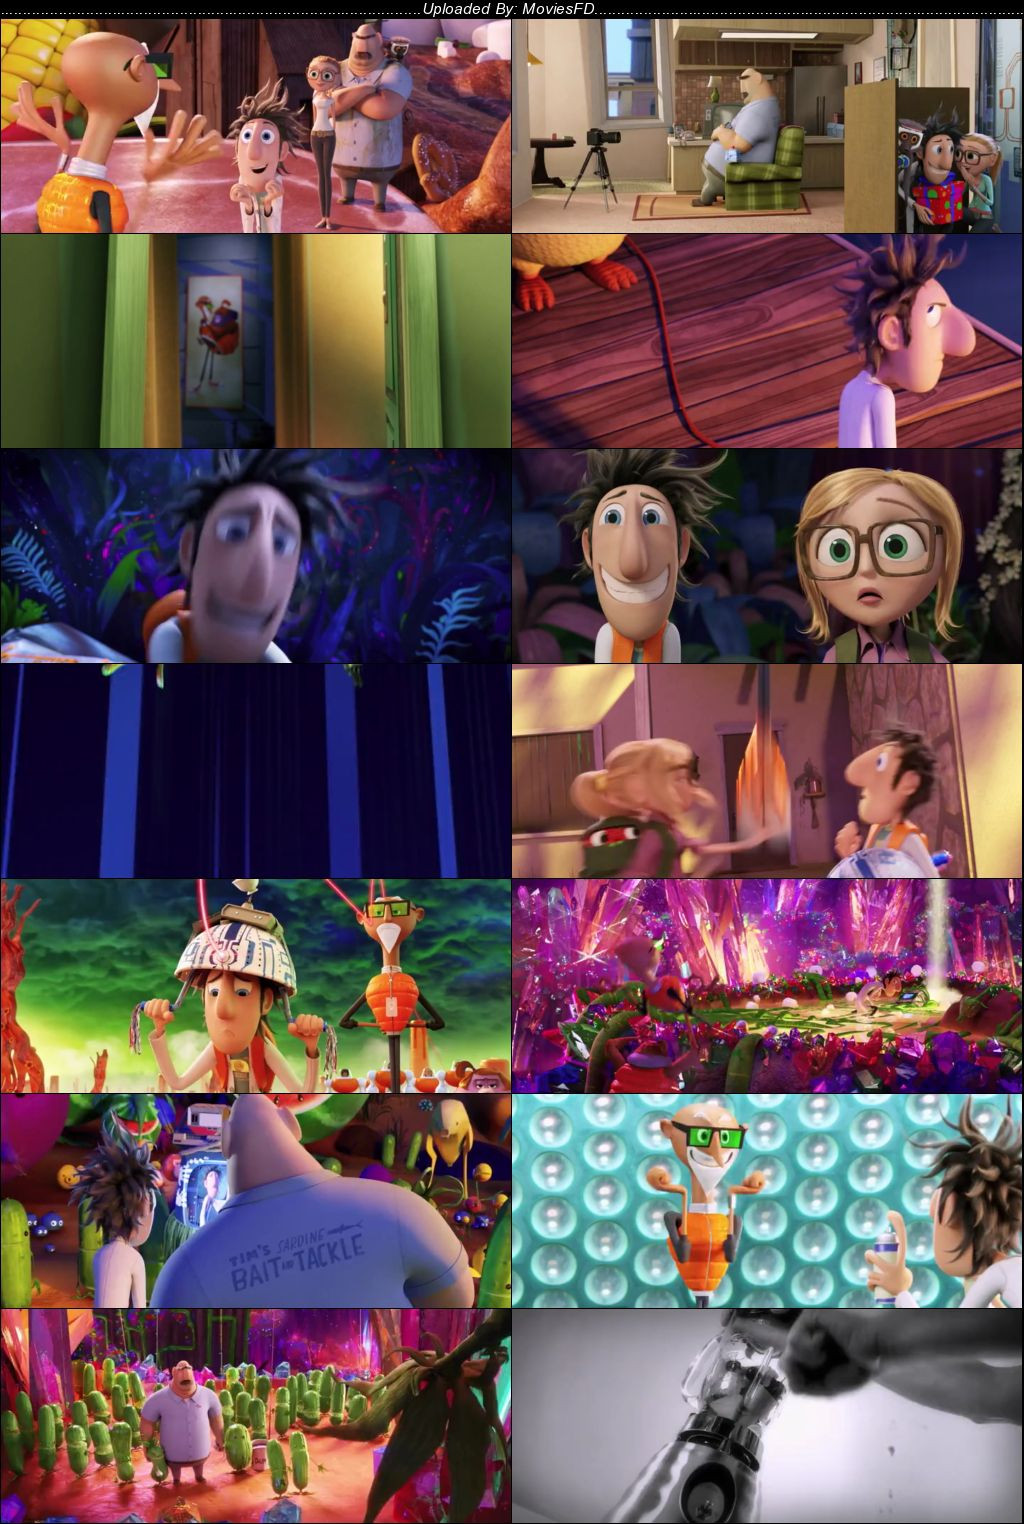 Download Cloudy with a Chance of Meatballs 2 (2013) BluRay [Hindi + English] ESub 480p 720p